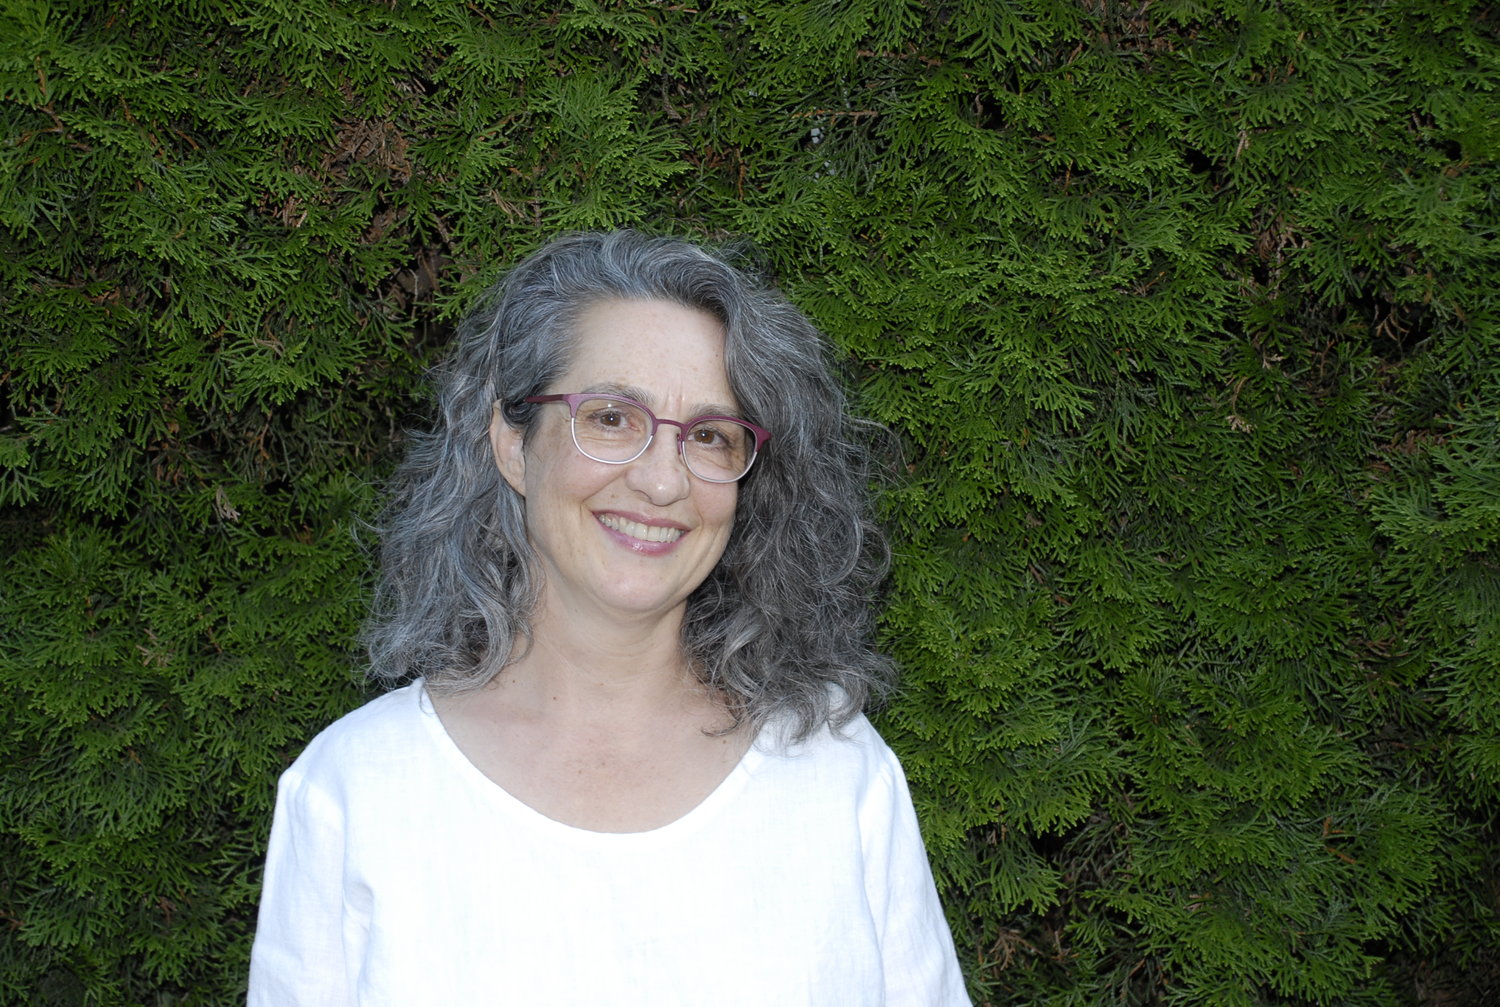 Ann Stinson, pictured here, has written her literary memoir, “The Ground at My Feet: Sustaining a Family and a Forest,”